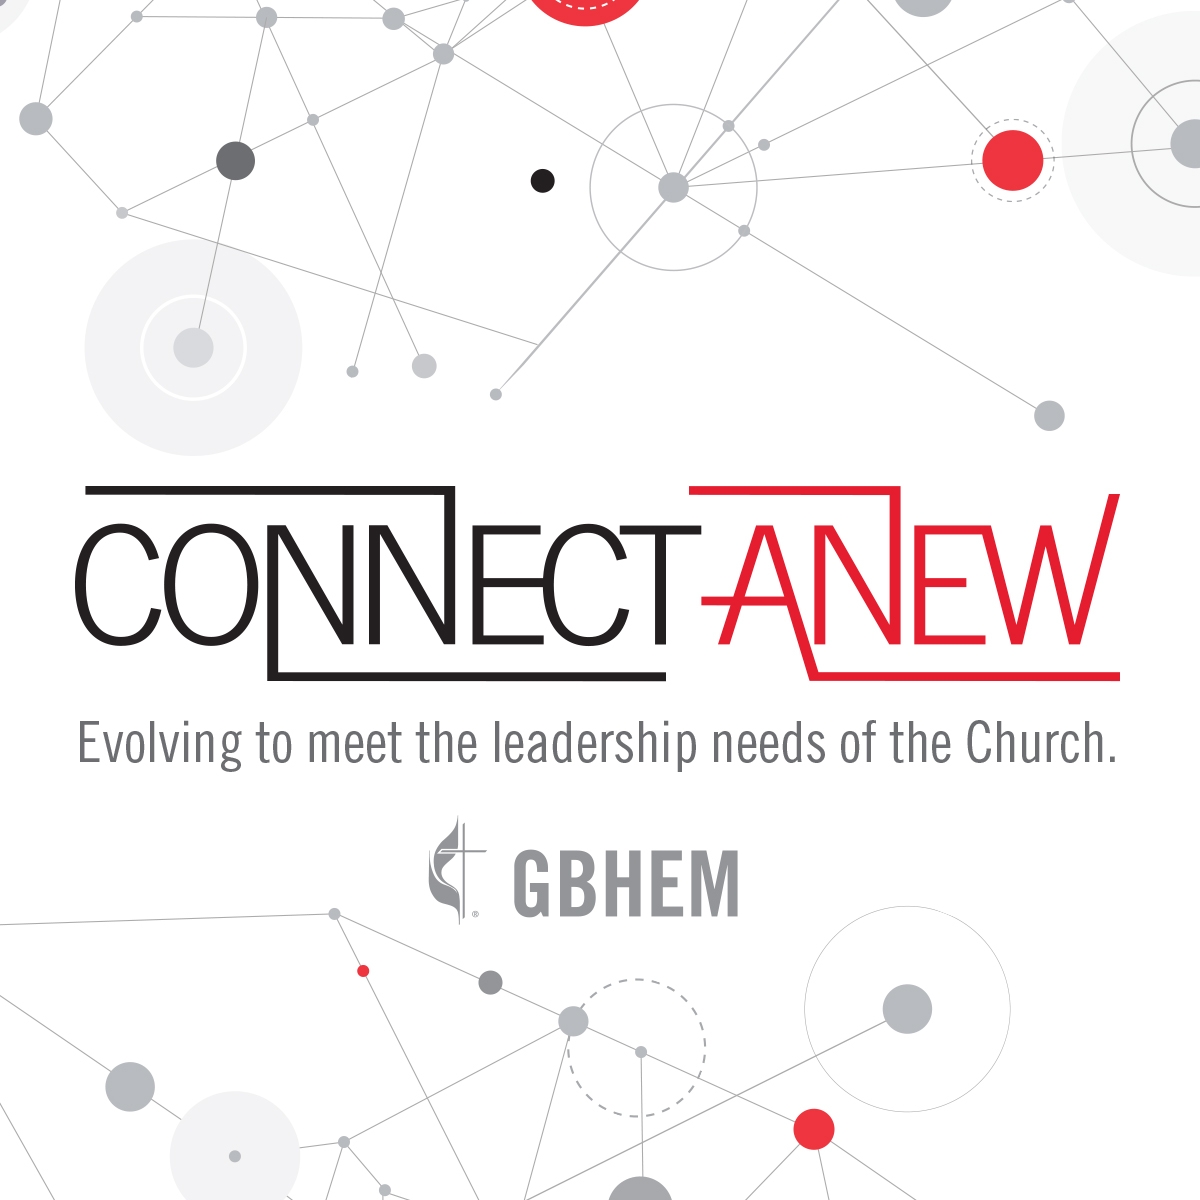 CONNECT ANEW Resources Available: Information and Resources on GBHEM’s Strategy to Evolve to Meet the Leadership Needs of the Church